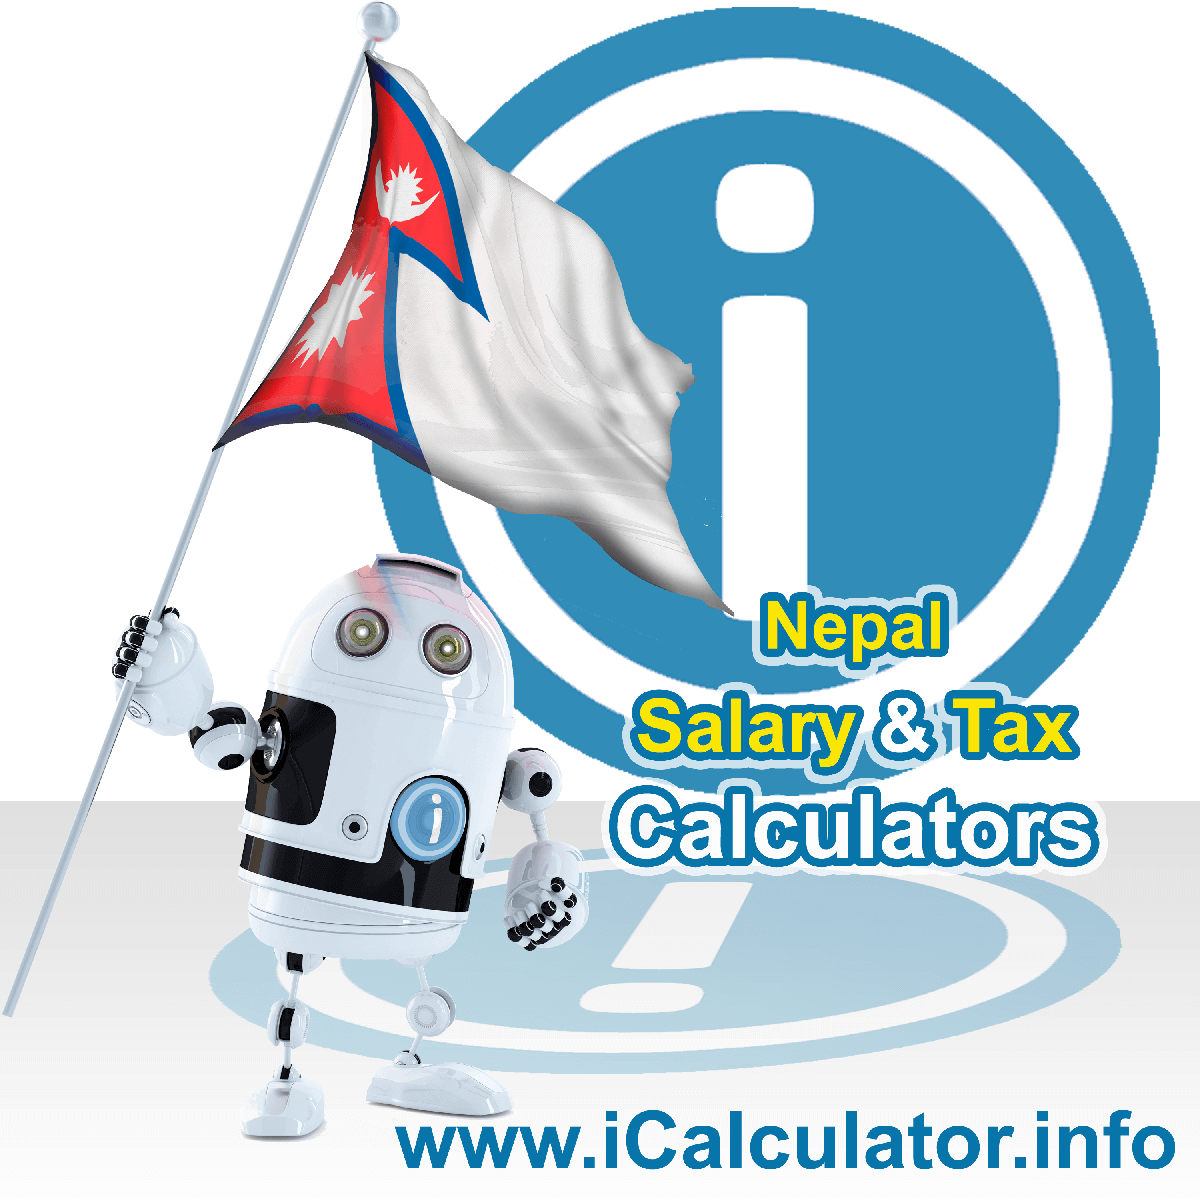 Nepal Tax Calculator. This image shows the Nepal flag and information relating to the tax formula for the Nepal Salary Calculator